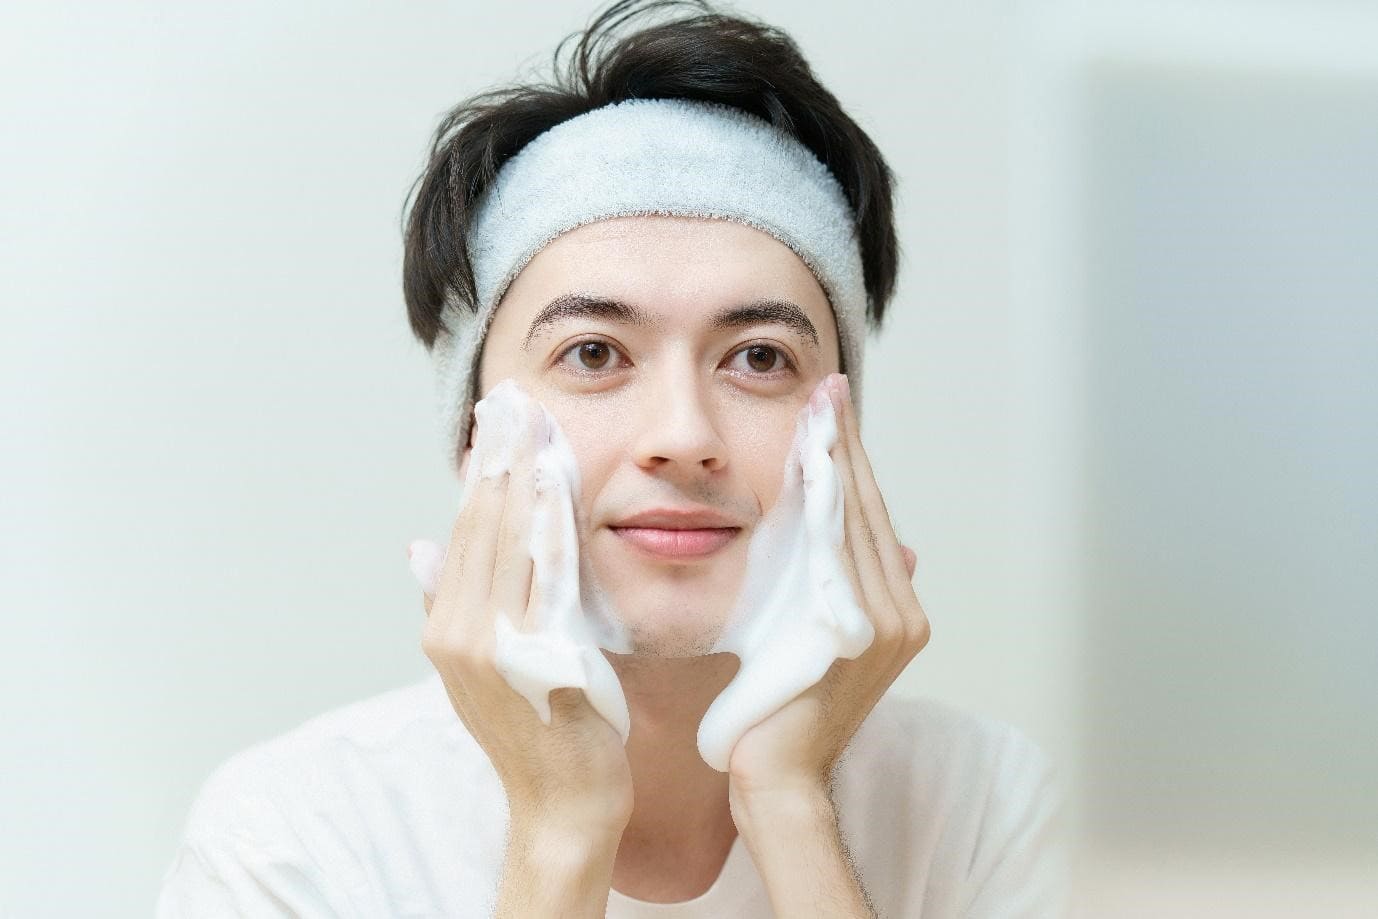 Should You Go for a Scrub-based Face Wash?